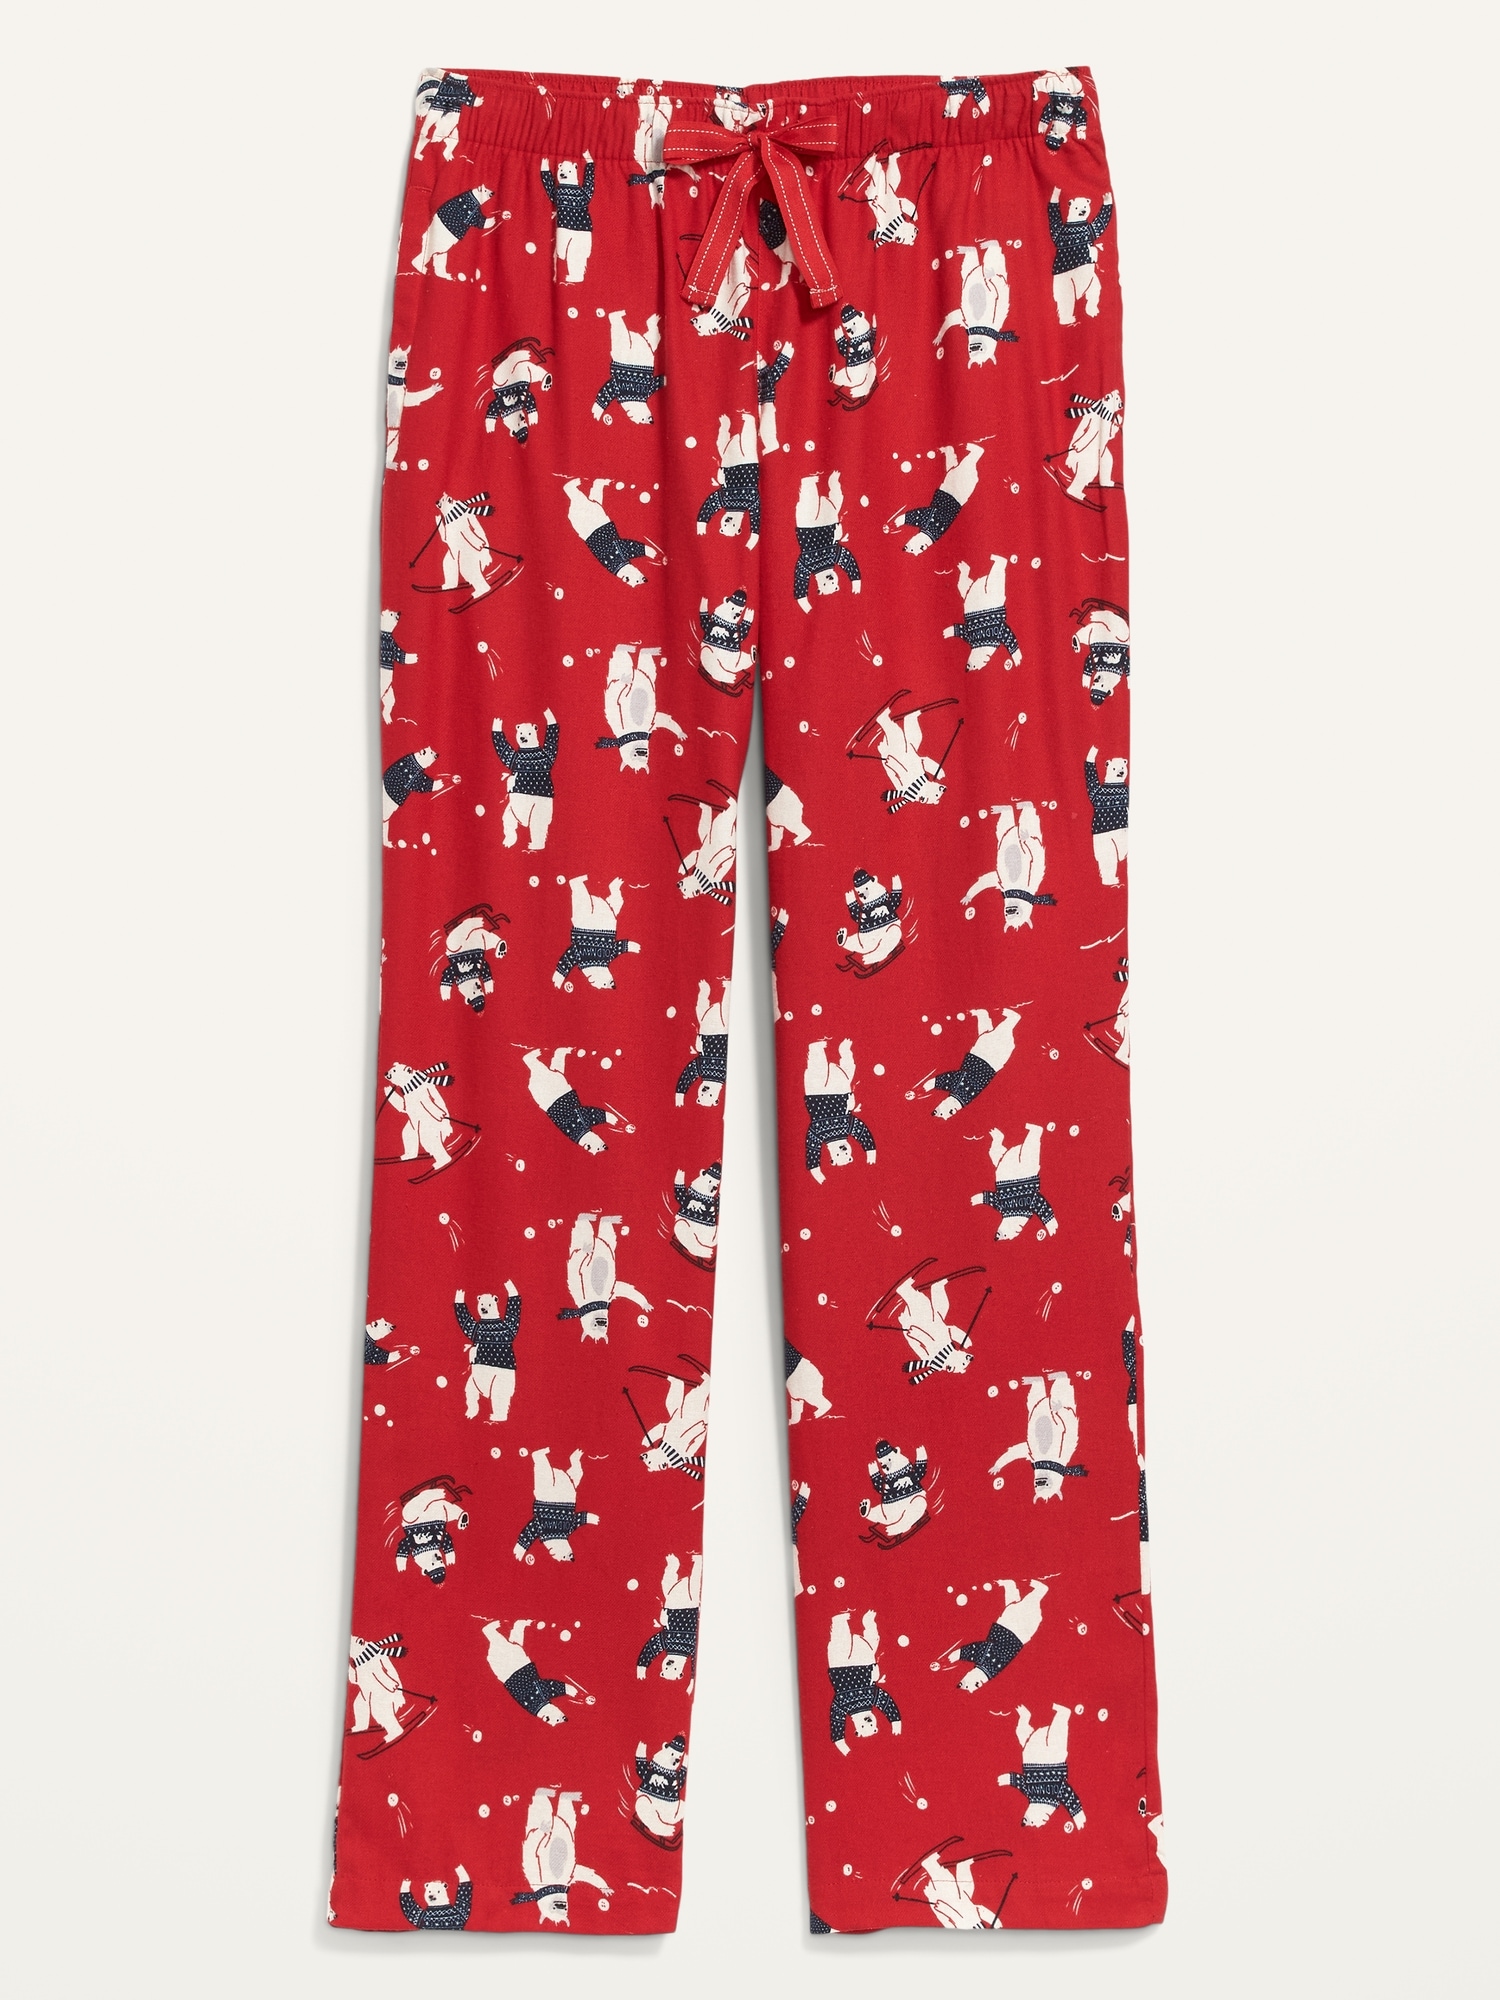 Matching Printed Flannel Pajama Pants for Women | Old Navy